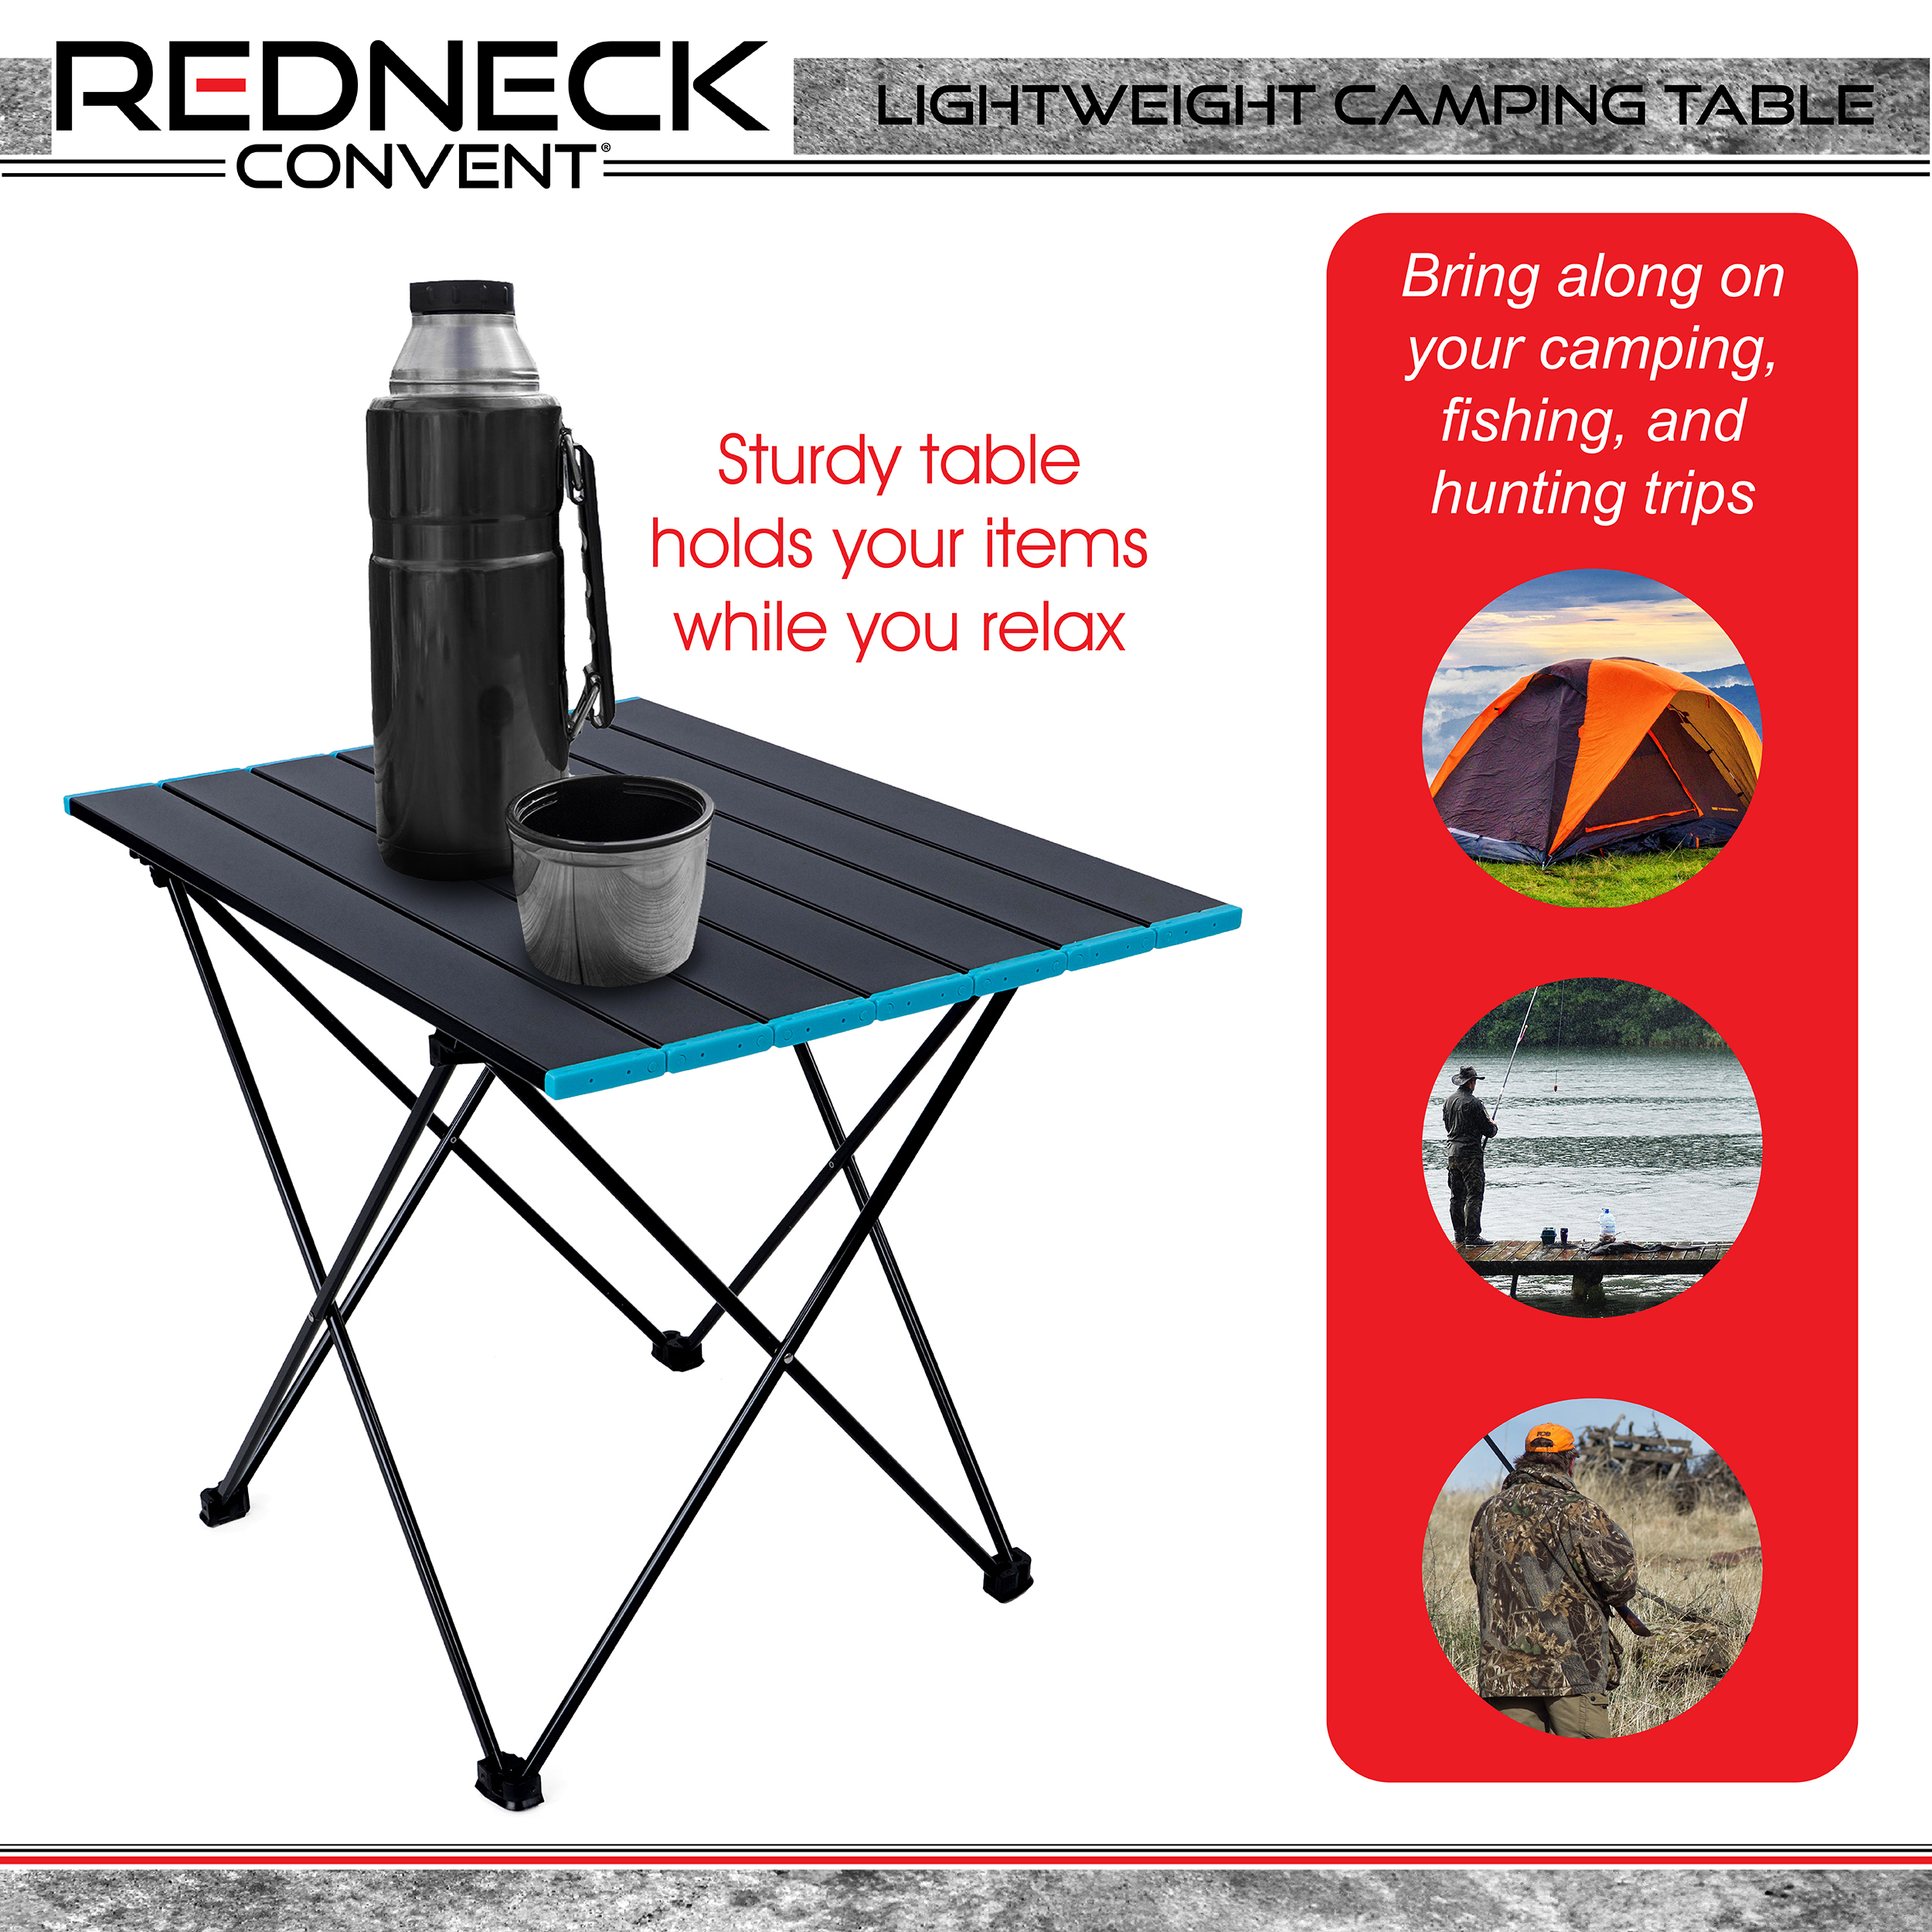 Redneck Convent Camping Table, Black - image 5 of 7